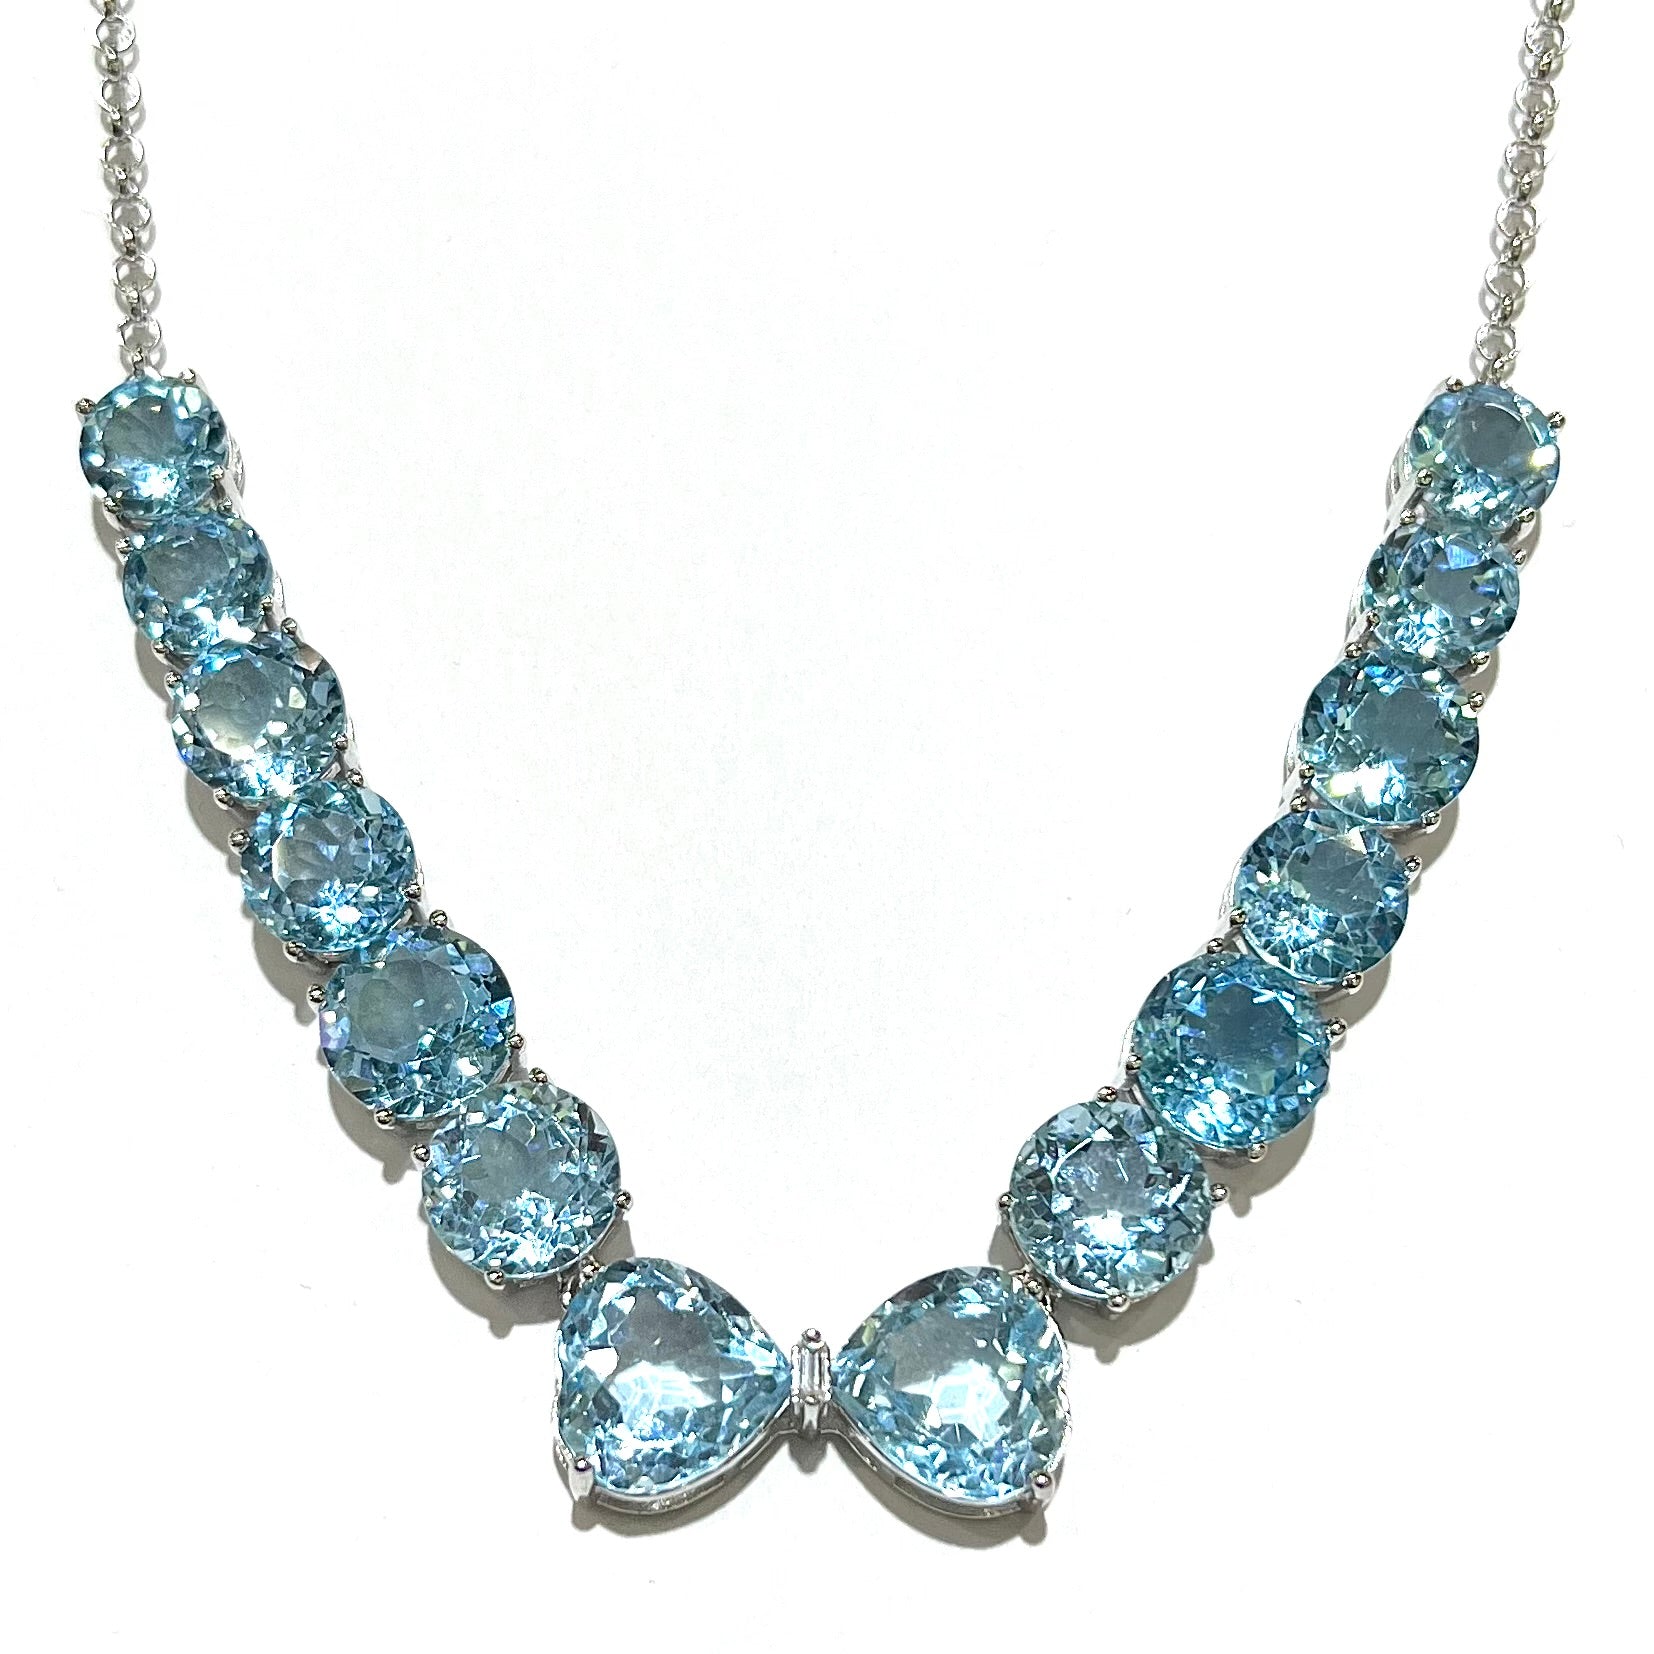 A string of twelve round brilliant cut sky-blue topaz gemstones with two heart shaped topaz gems and a single emerald cut white zircon between them on a sterling silver chain.